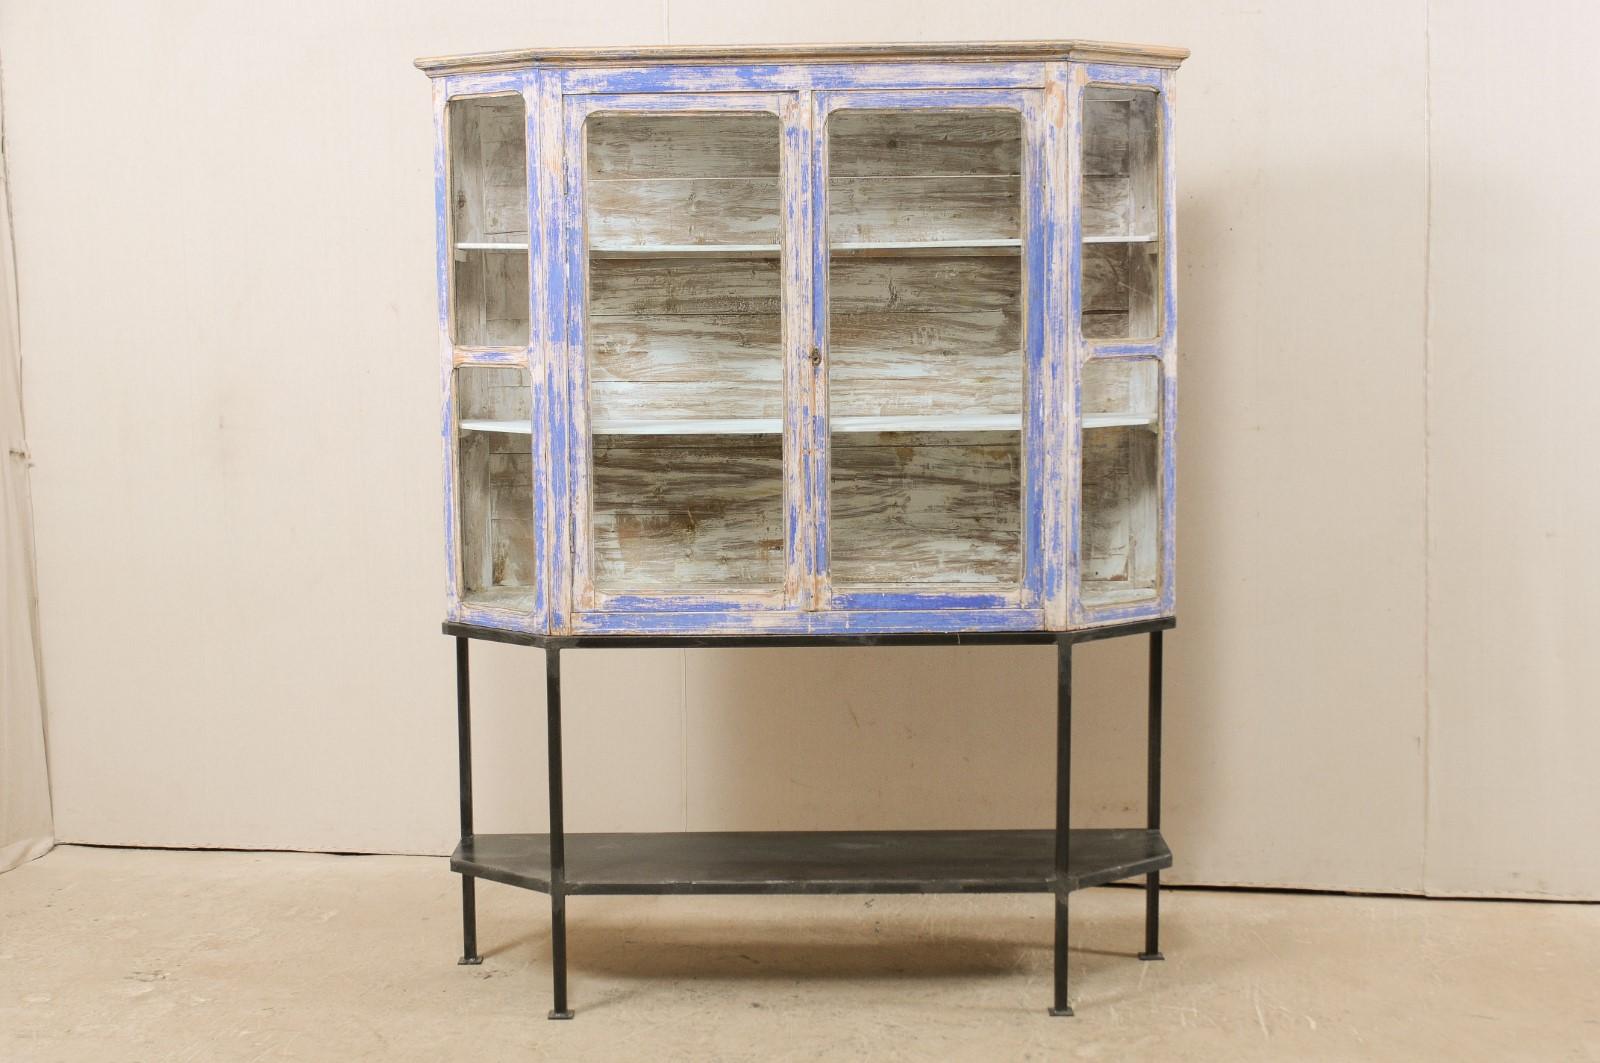 A French glass and wood display cabinet from the 19th century, on newer custom iron base. This antique cabinet from France has a glass display top with two doors at center, and inwardly angled (or canted) glass side windows. It is raised atop a